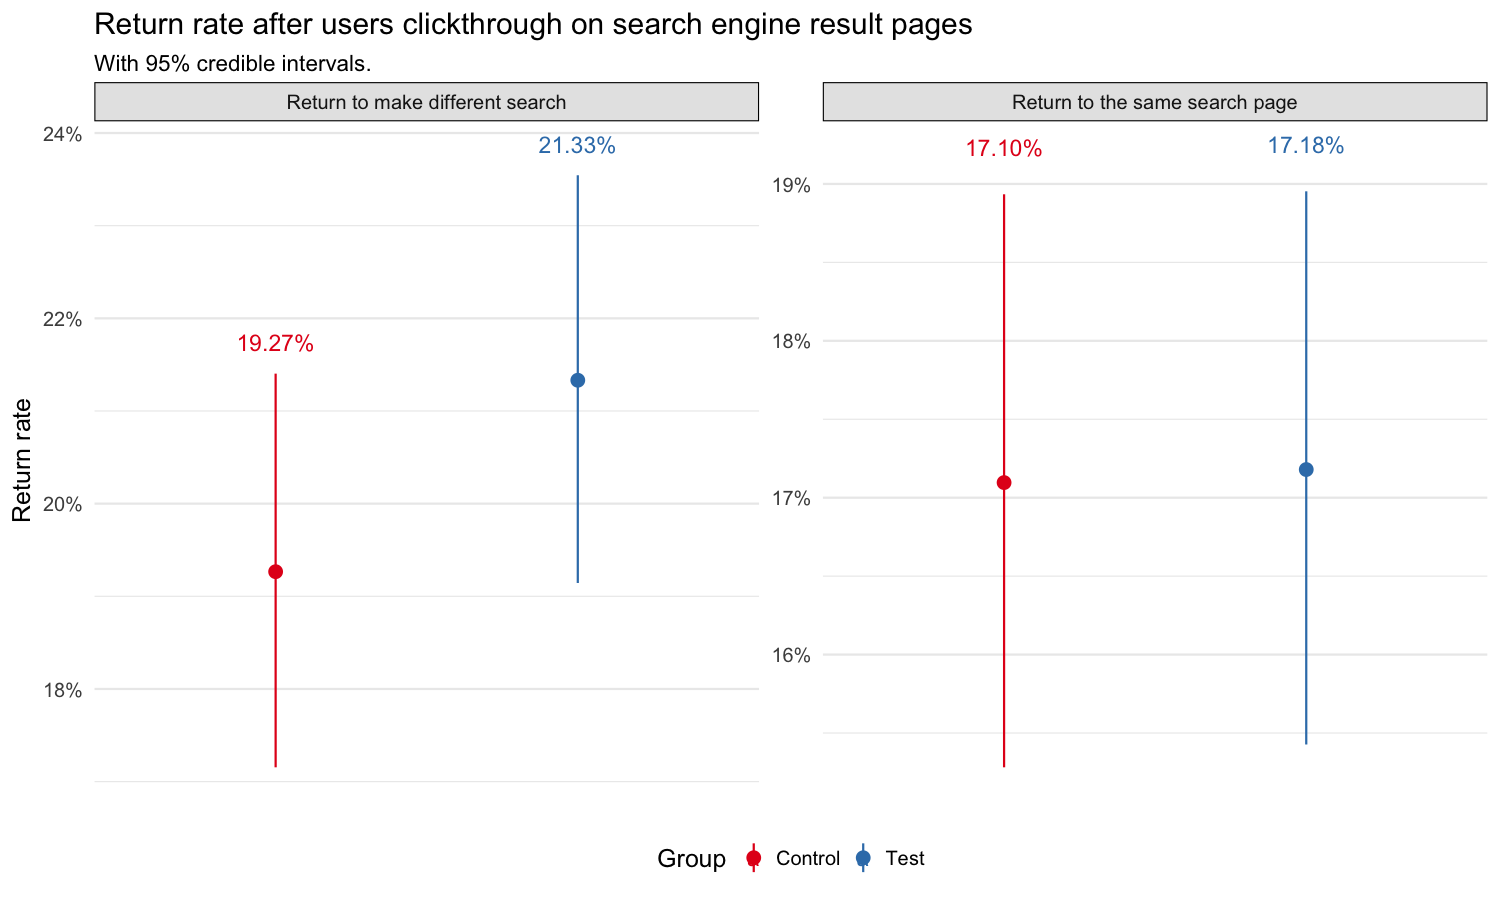 **Figure 9**: Return rate after users clickthrough on search engine result pages.